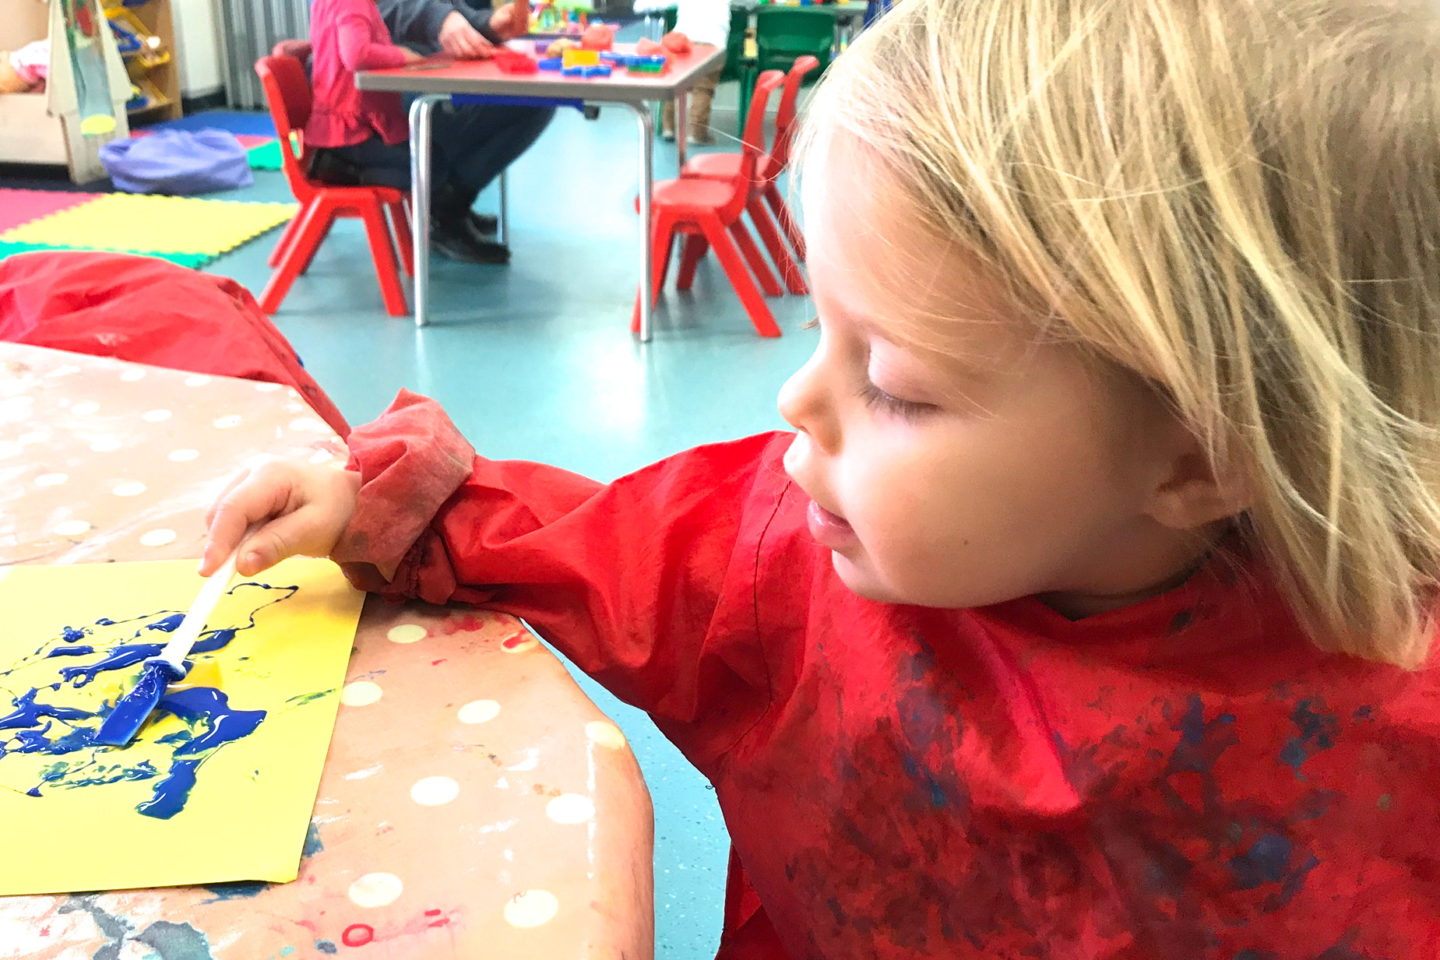 Two year old in an apron, painting